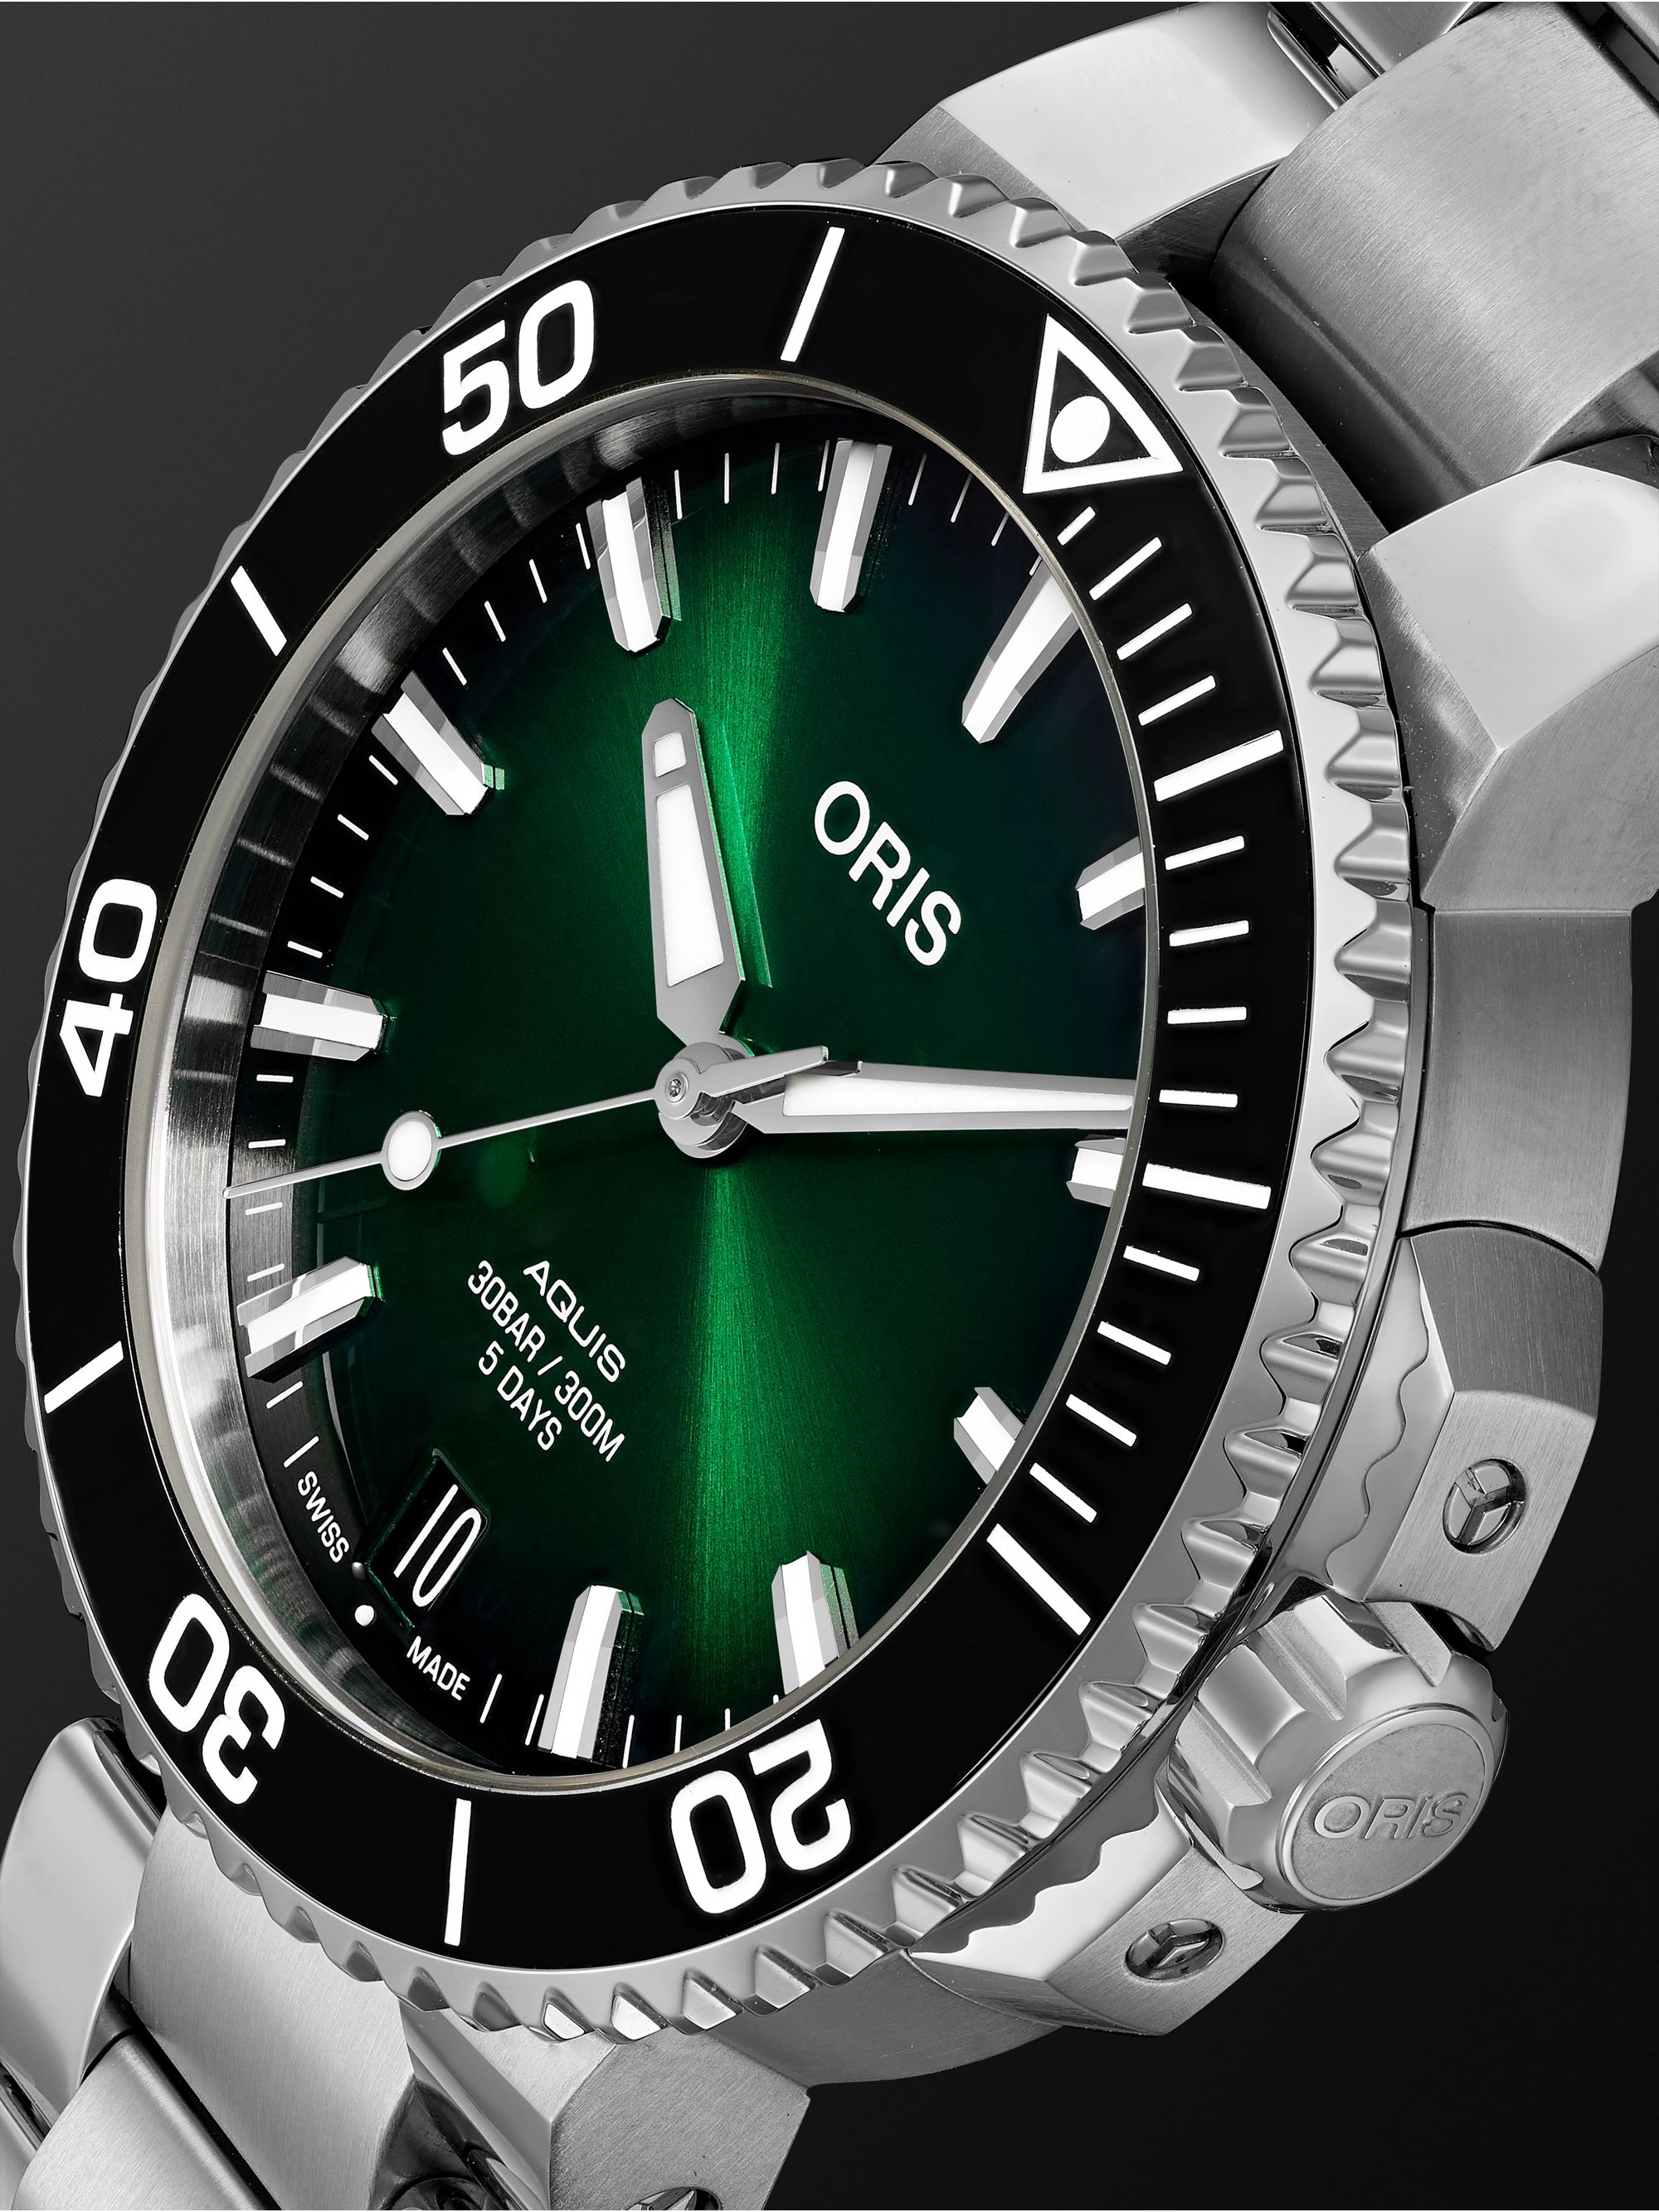 ORIS Aquis Date Calibre 400 Automatic 43.5mm Stainless Steel Watch, Ref. No. 01 400 7769 4157-07 8 22 09PEB